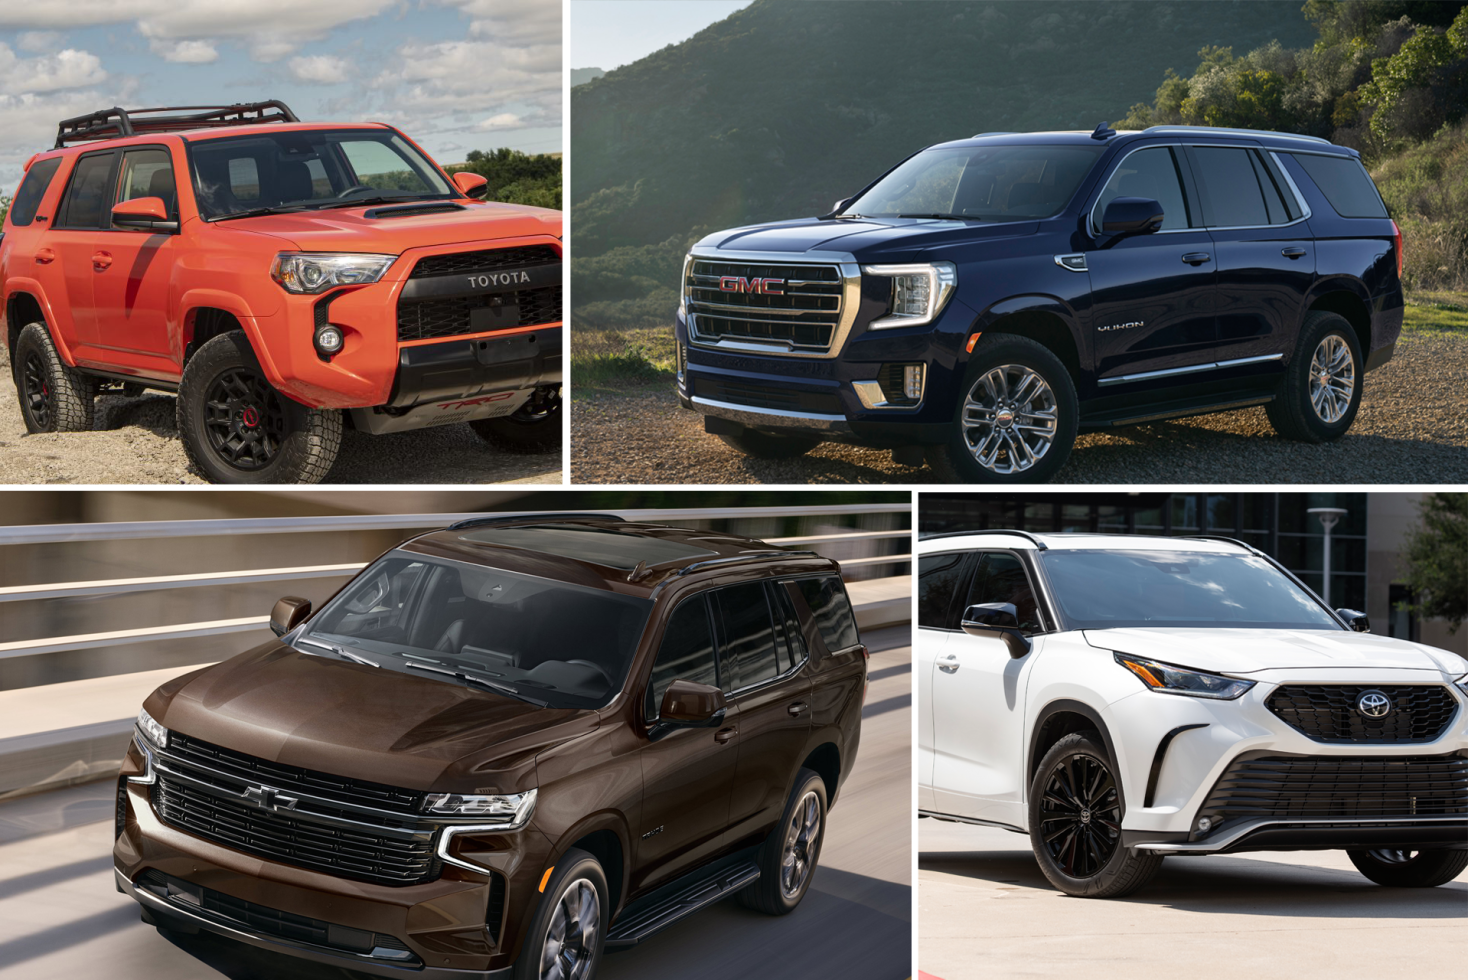 Go the Distance: Top 10 Longest Range SUVs You Can Buy Today